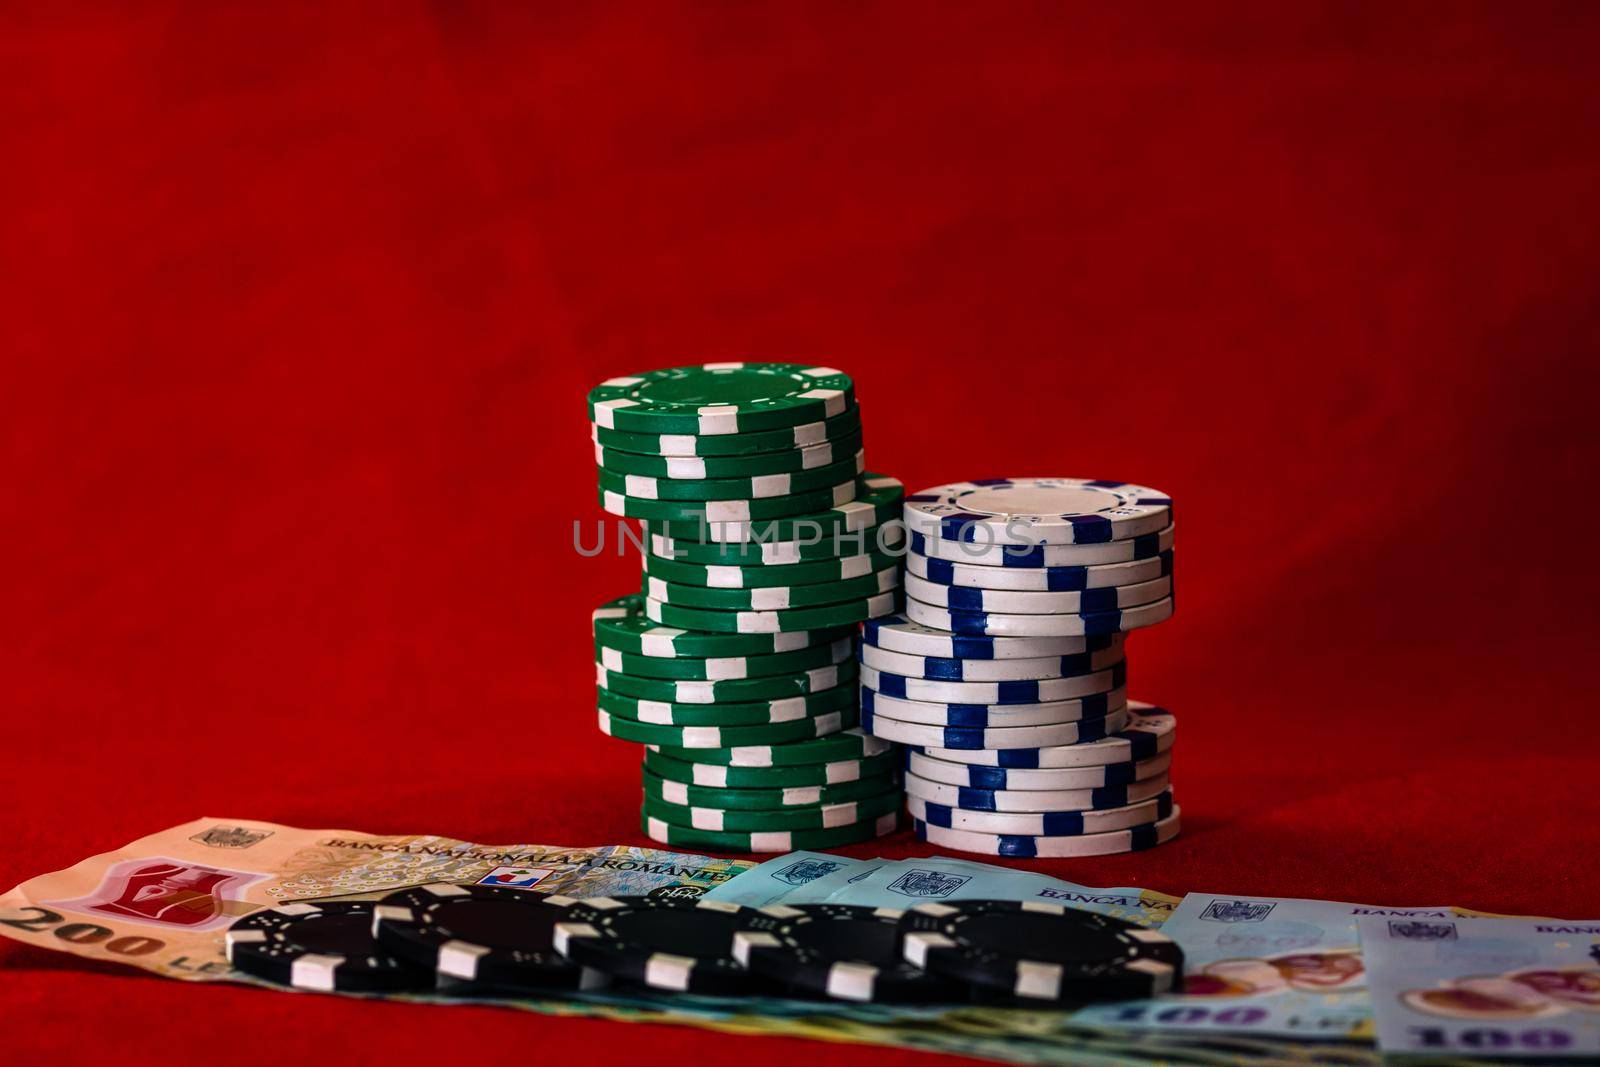 Stacks of poker chips with money on red background, Romanian LEI currency